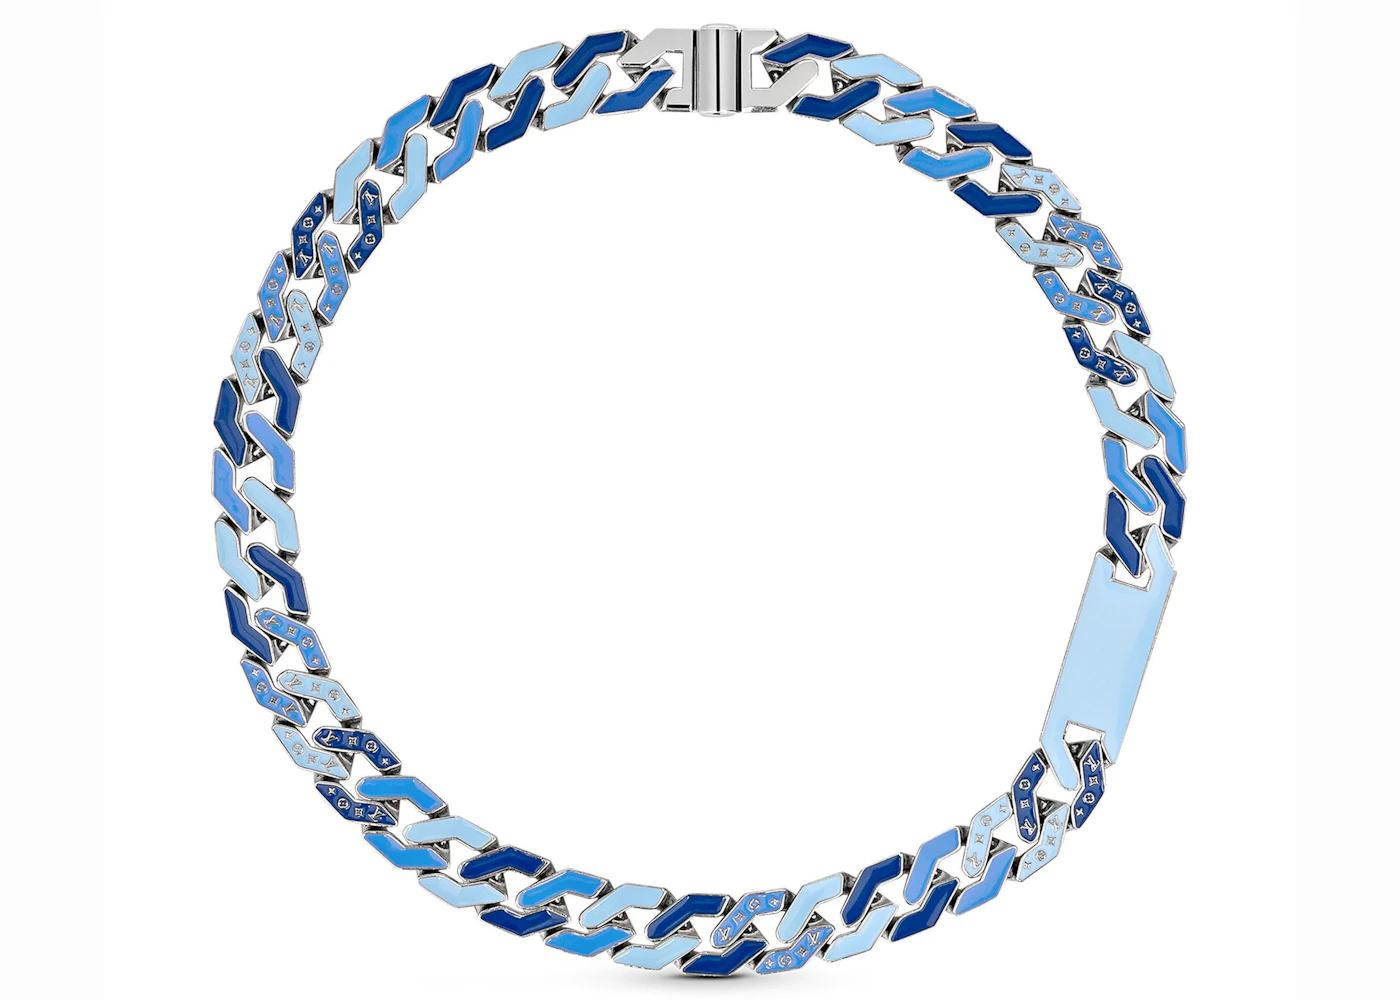 FJW TM: Branded Jewelry Louis Vuitton Chain Links Patches Necklace - Blue,  Silver-Tone Metal Chain, Necklaces - FJWBJ22129